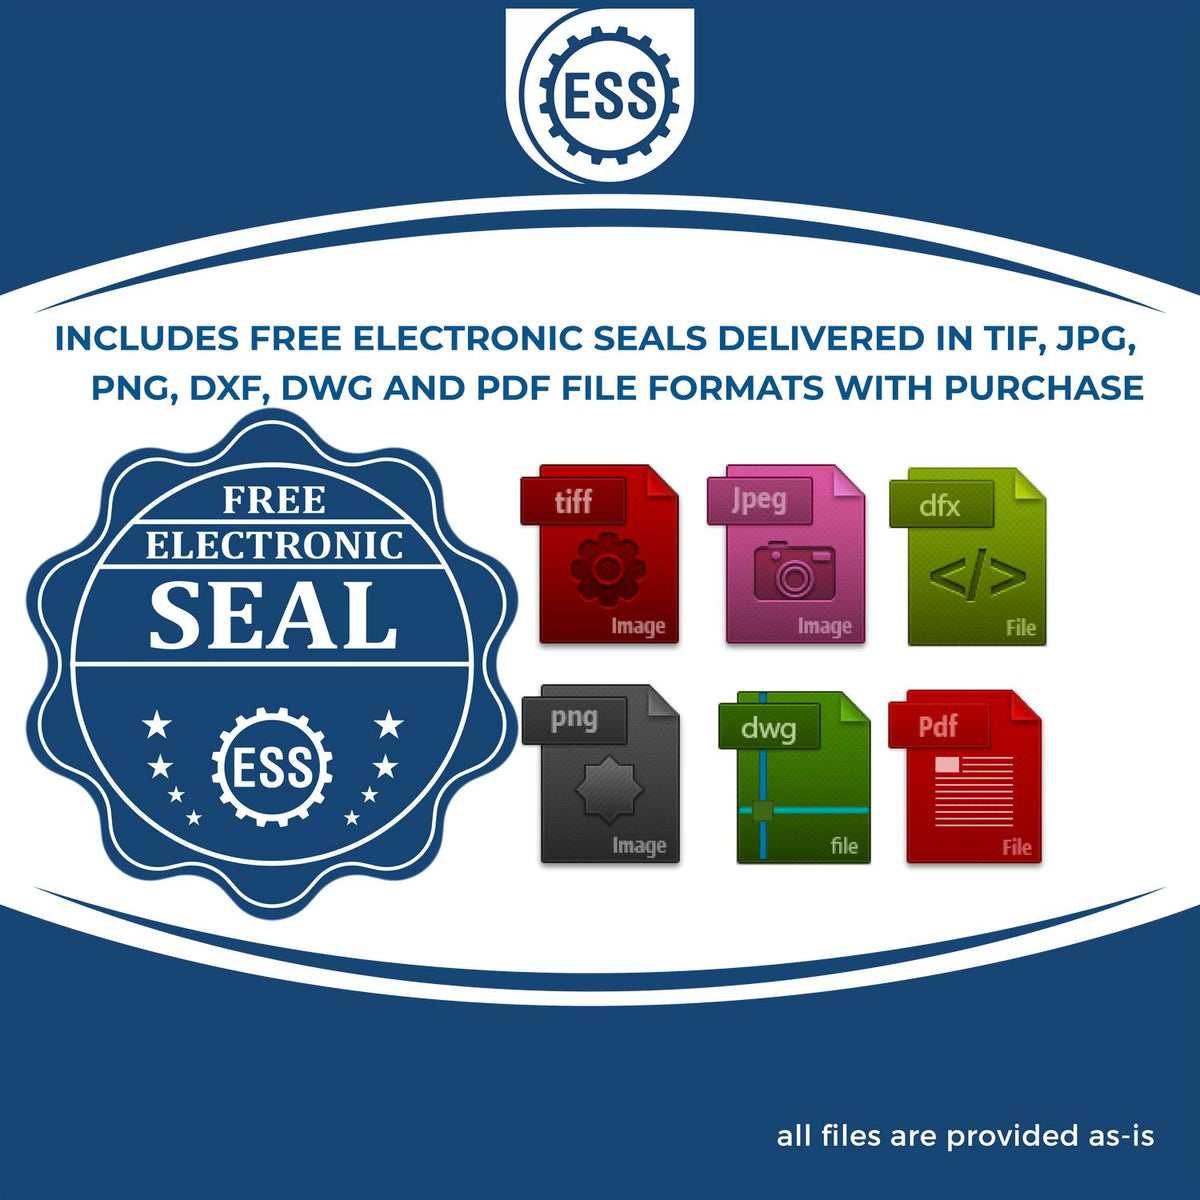 An infographic for the free electronic seal for the Hybrid Connecticut Geologist Seal illustrating the different file type icons such as DXF, DWG, TIF, JPG and PNG.